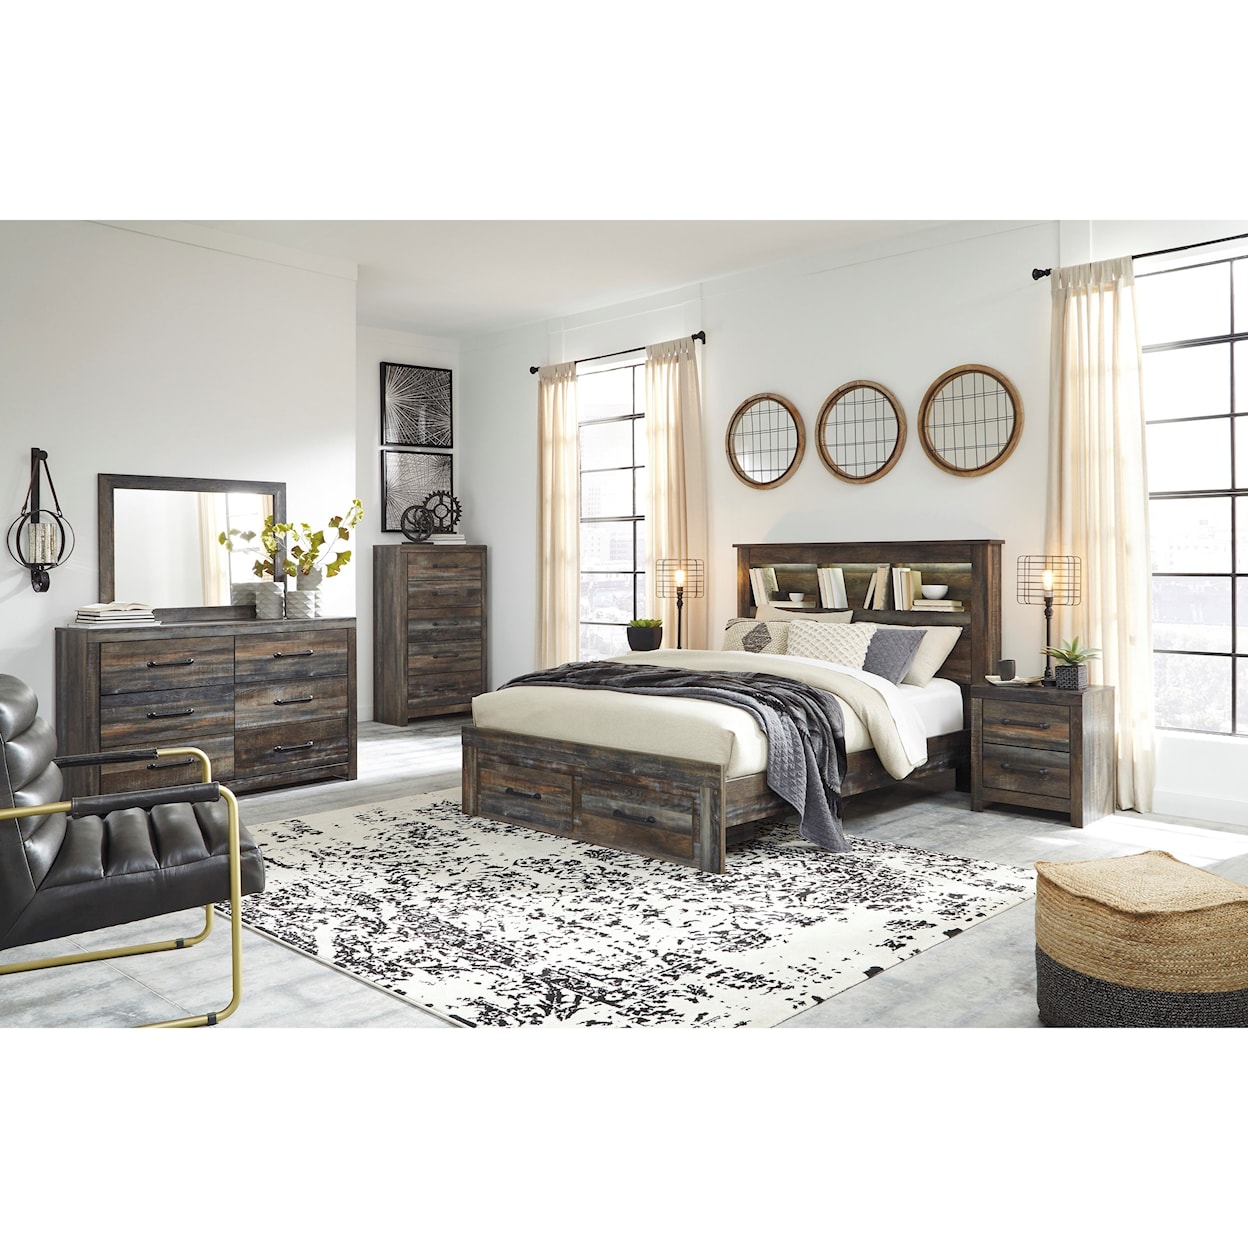 Signature Design by Ashley Drystan 7PC Queen Bedroom Group